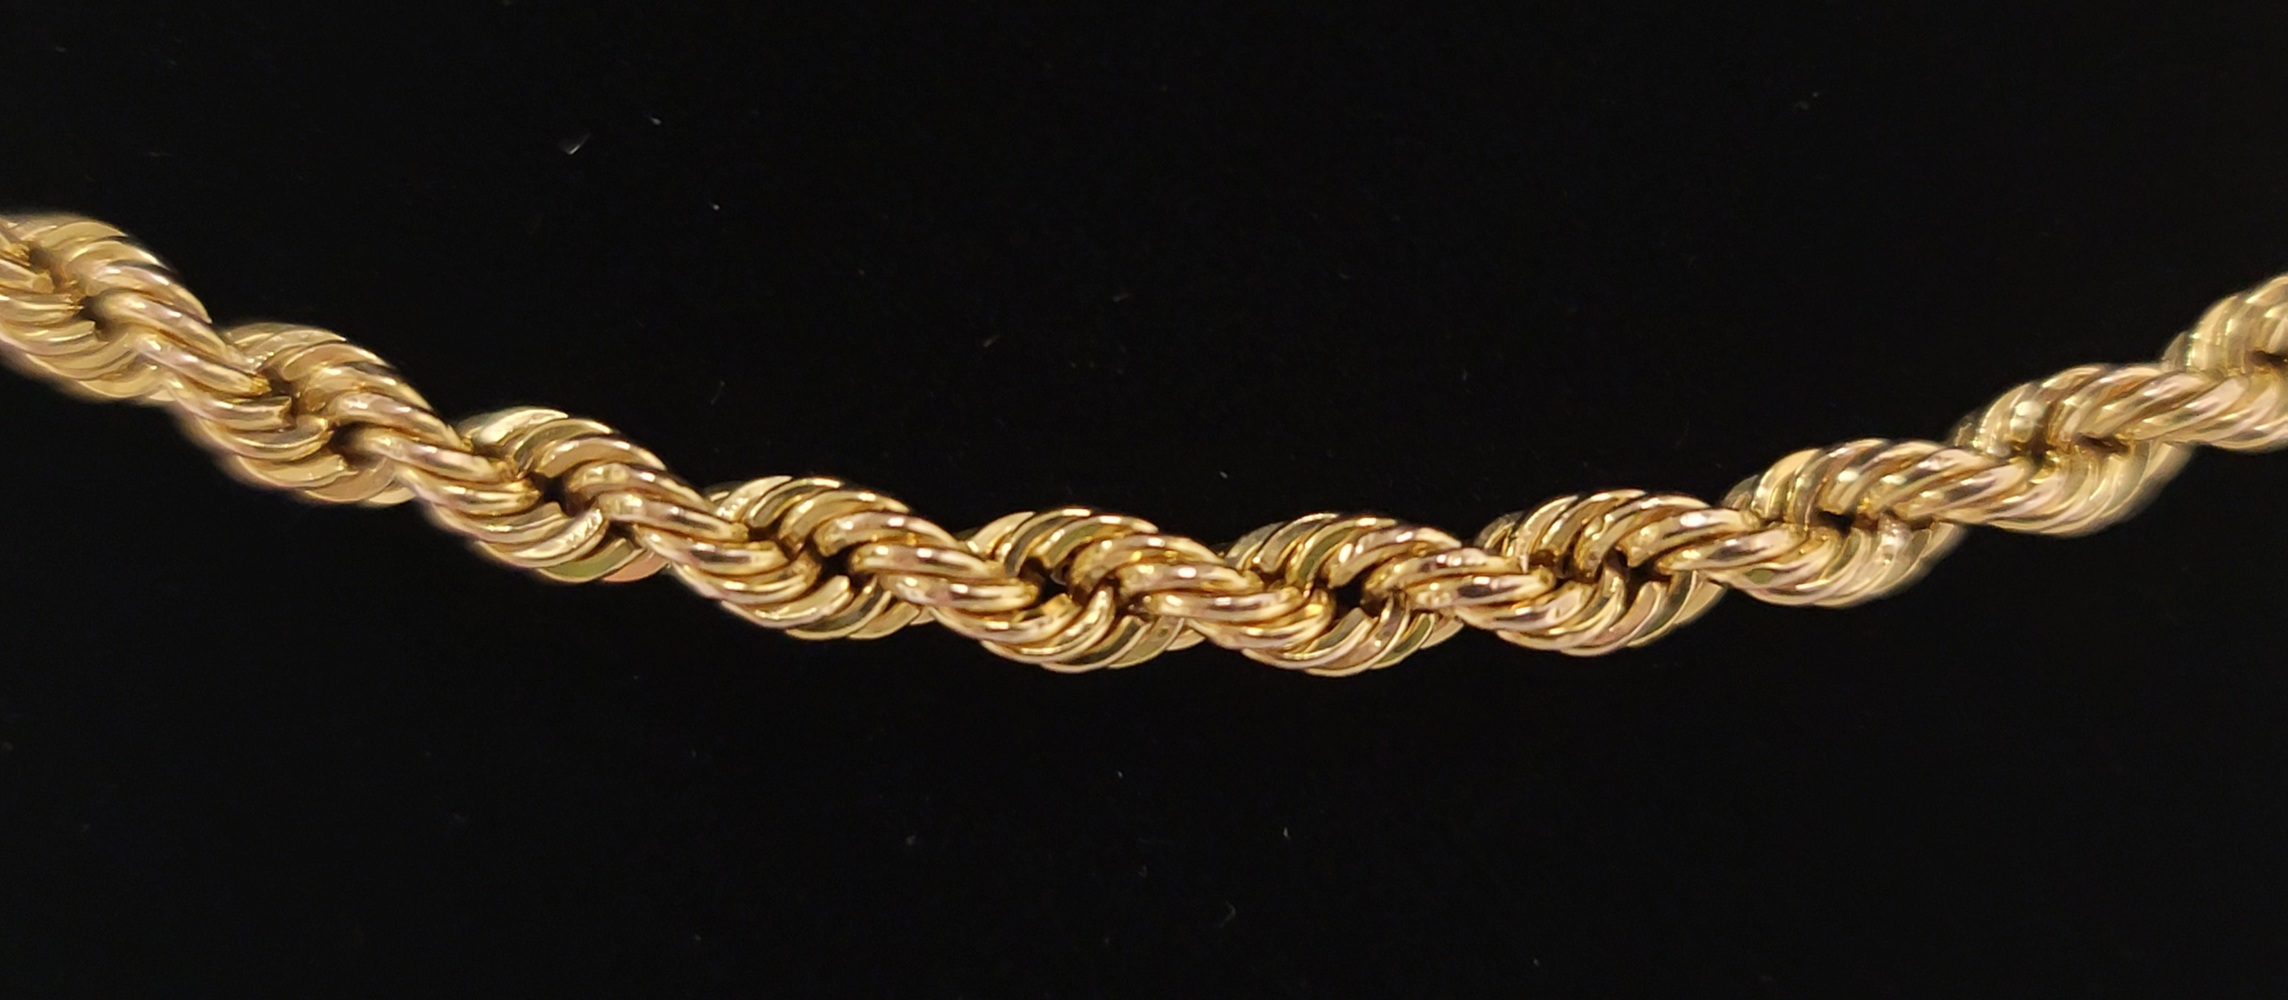 10 Karat Yellow Gold Rope Chain Necklace - Size: 30-Inch